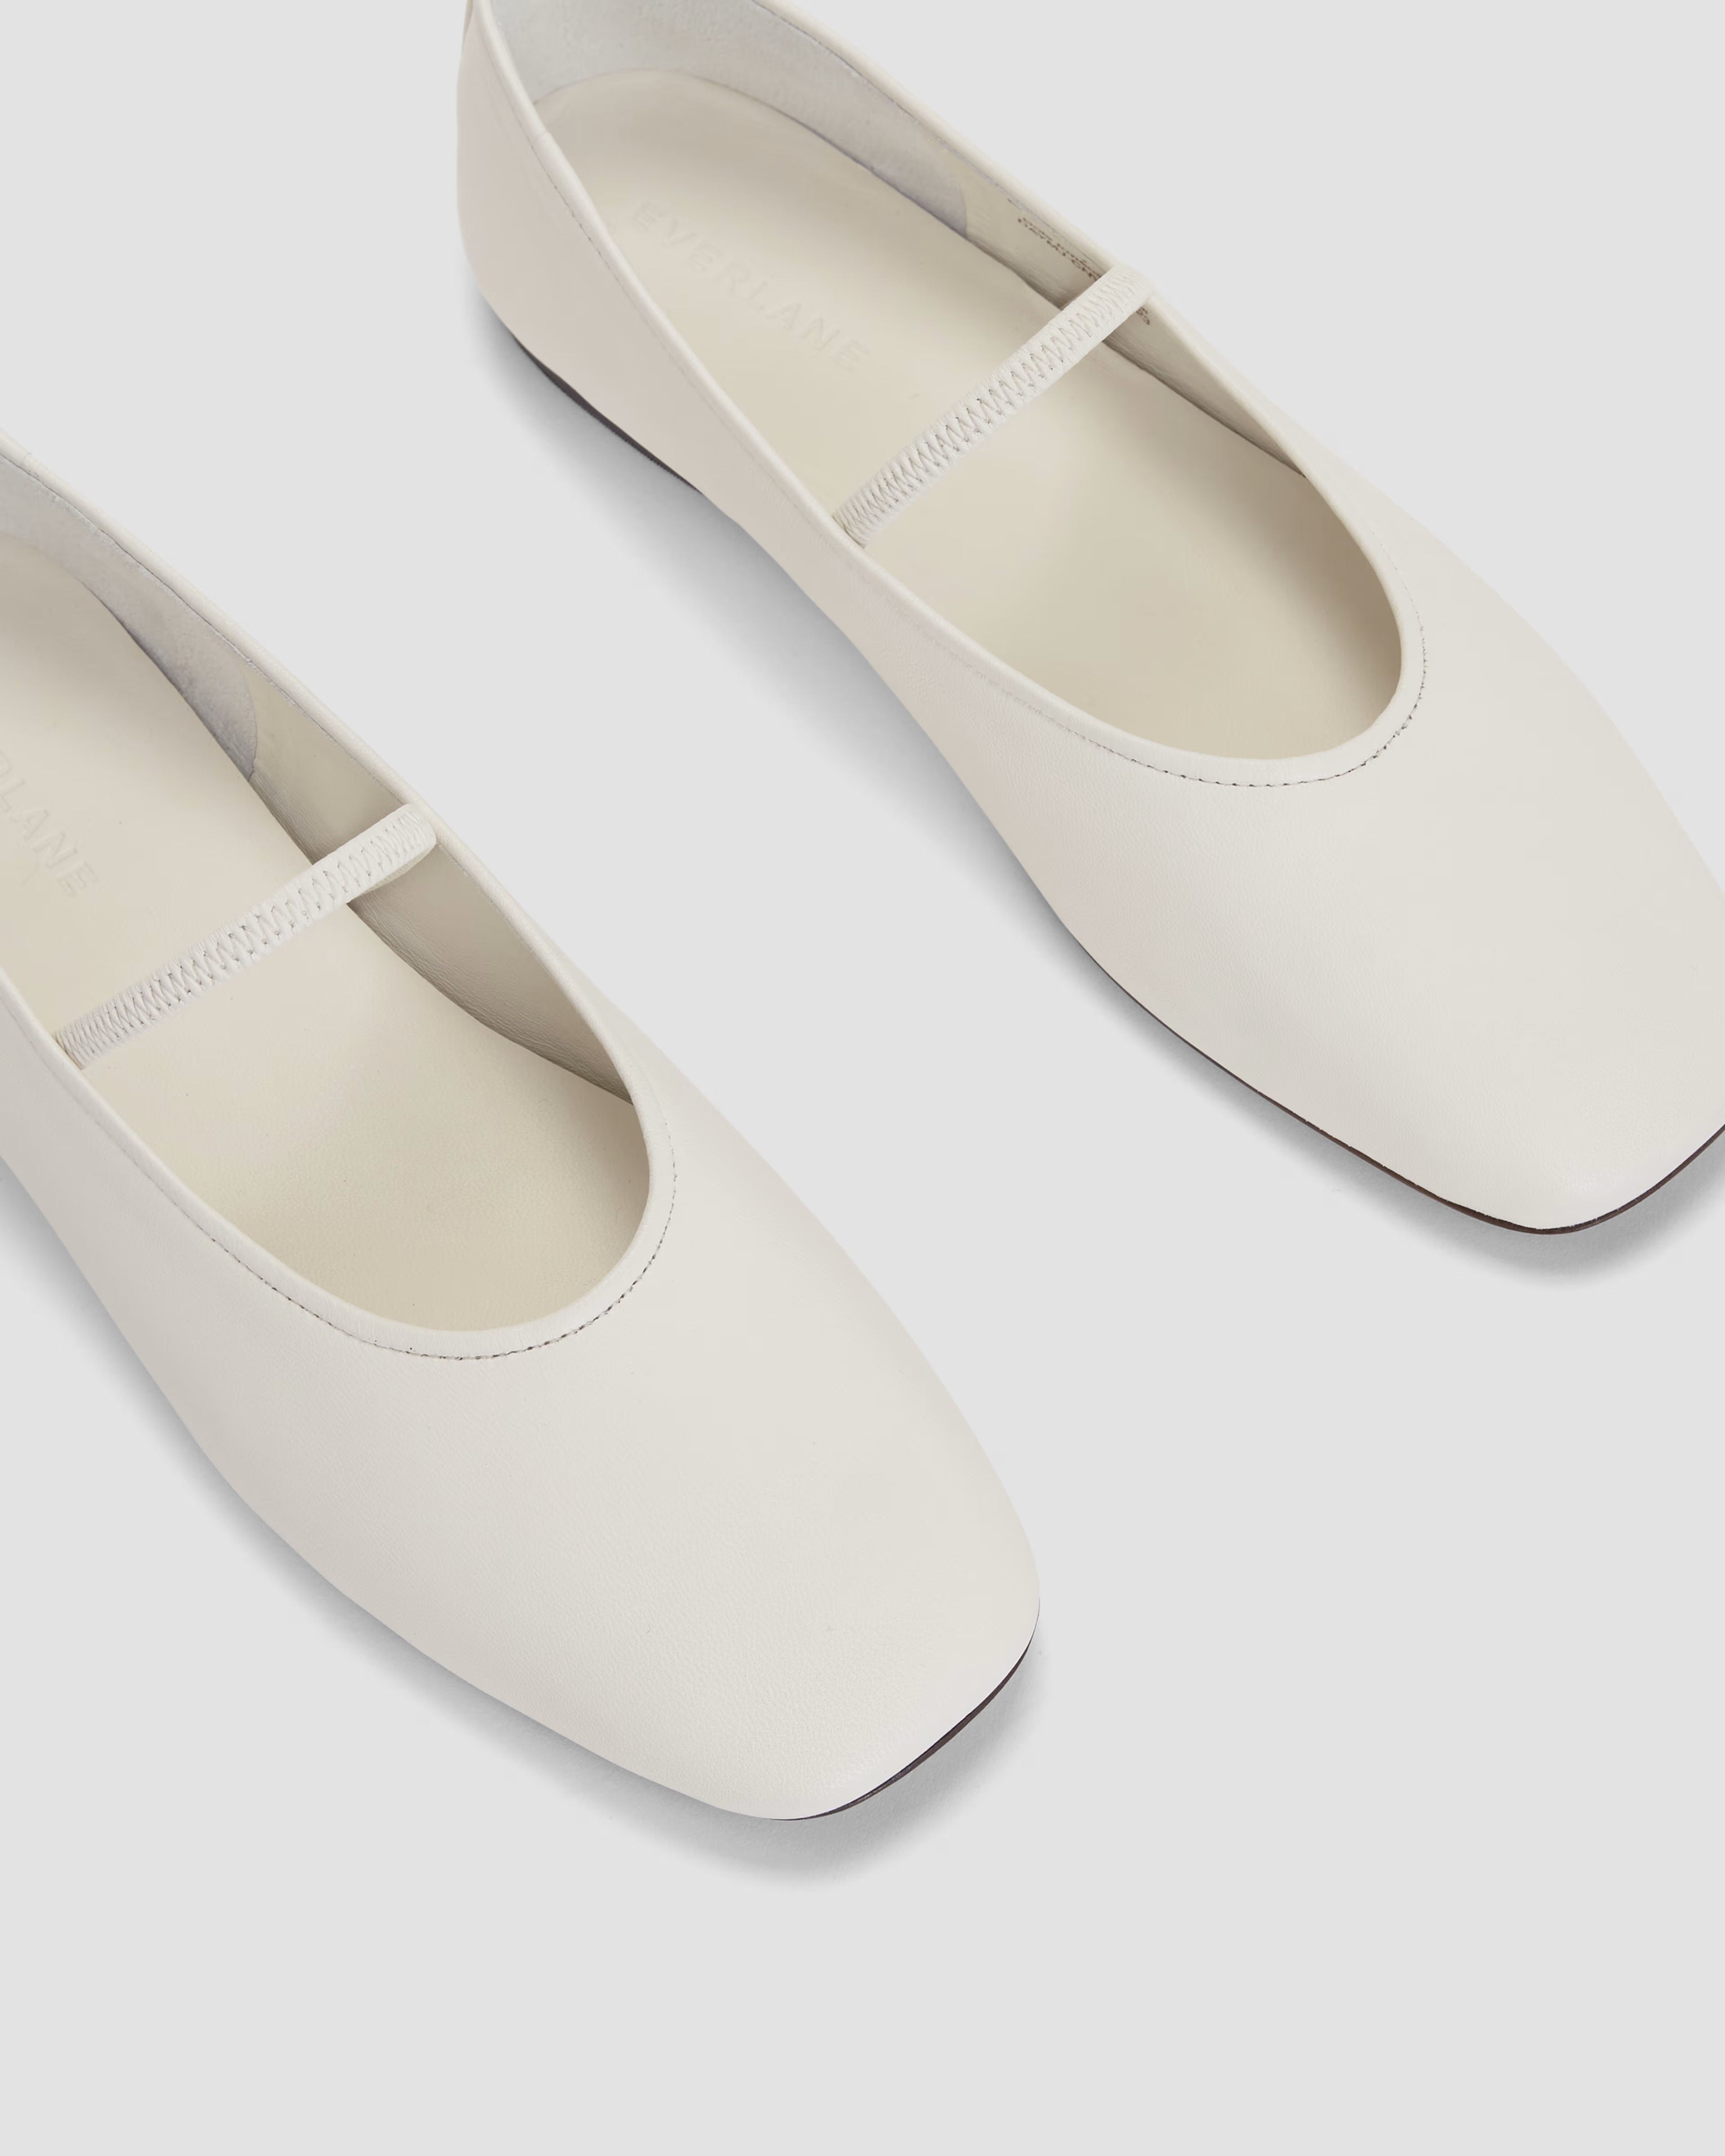 The Day Mary Jane | Everlane